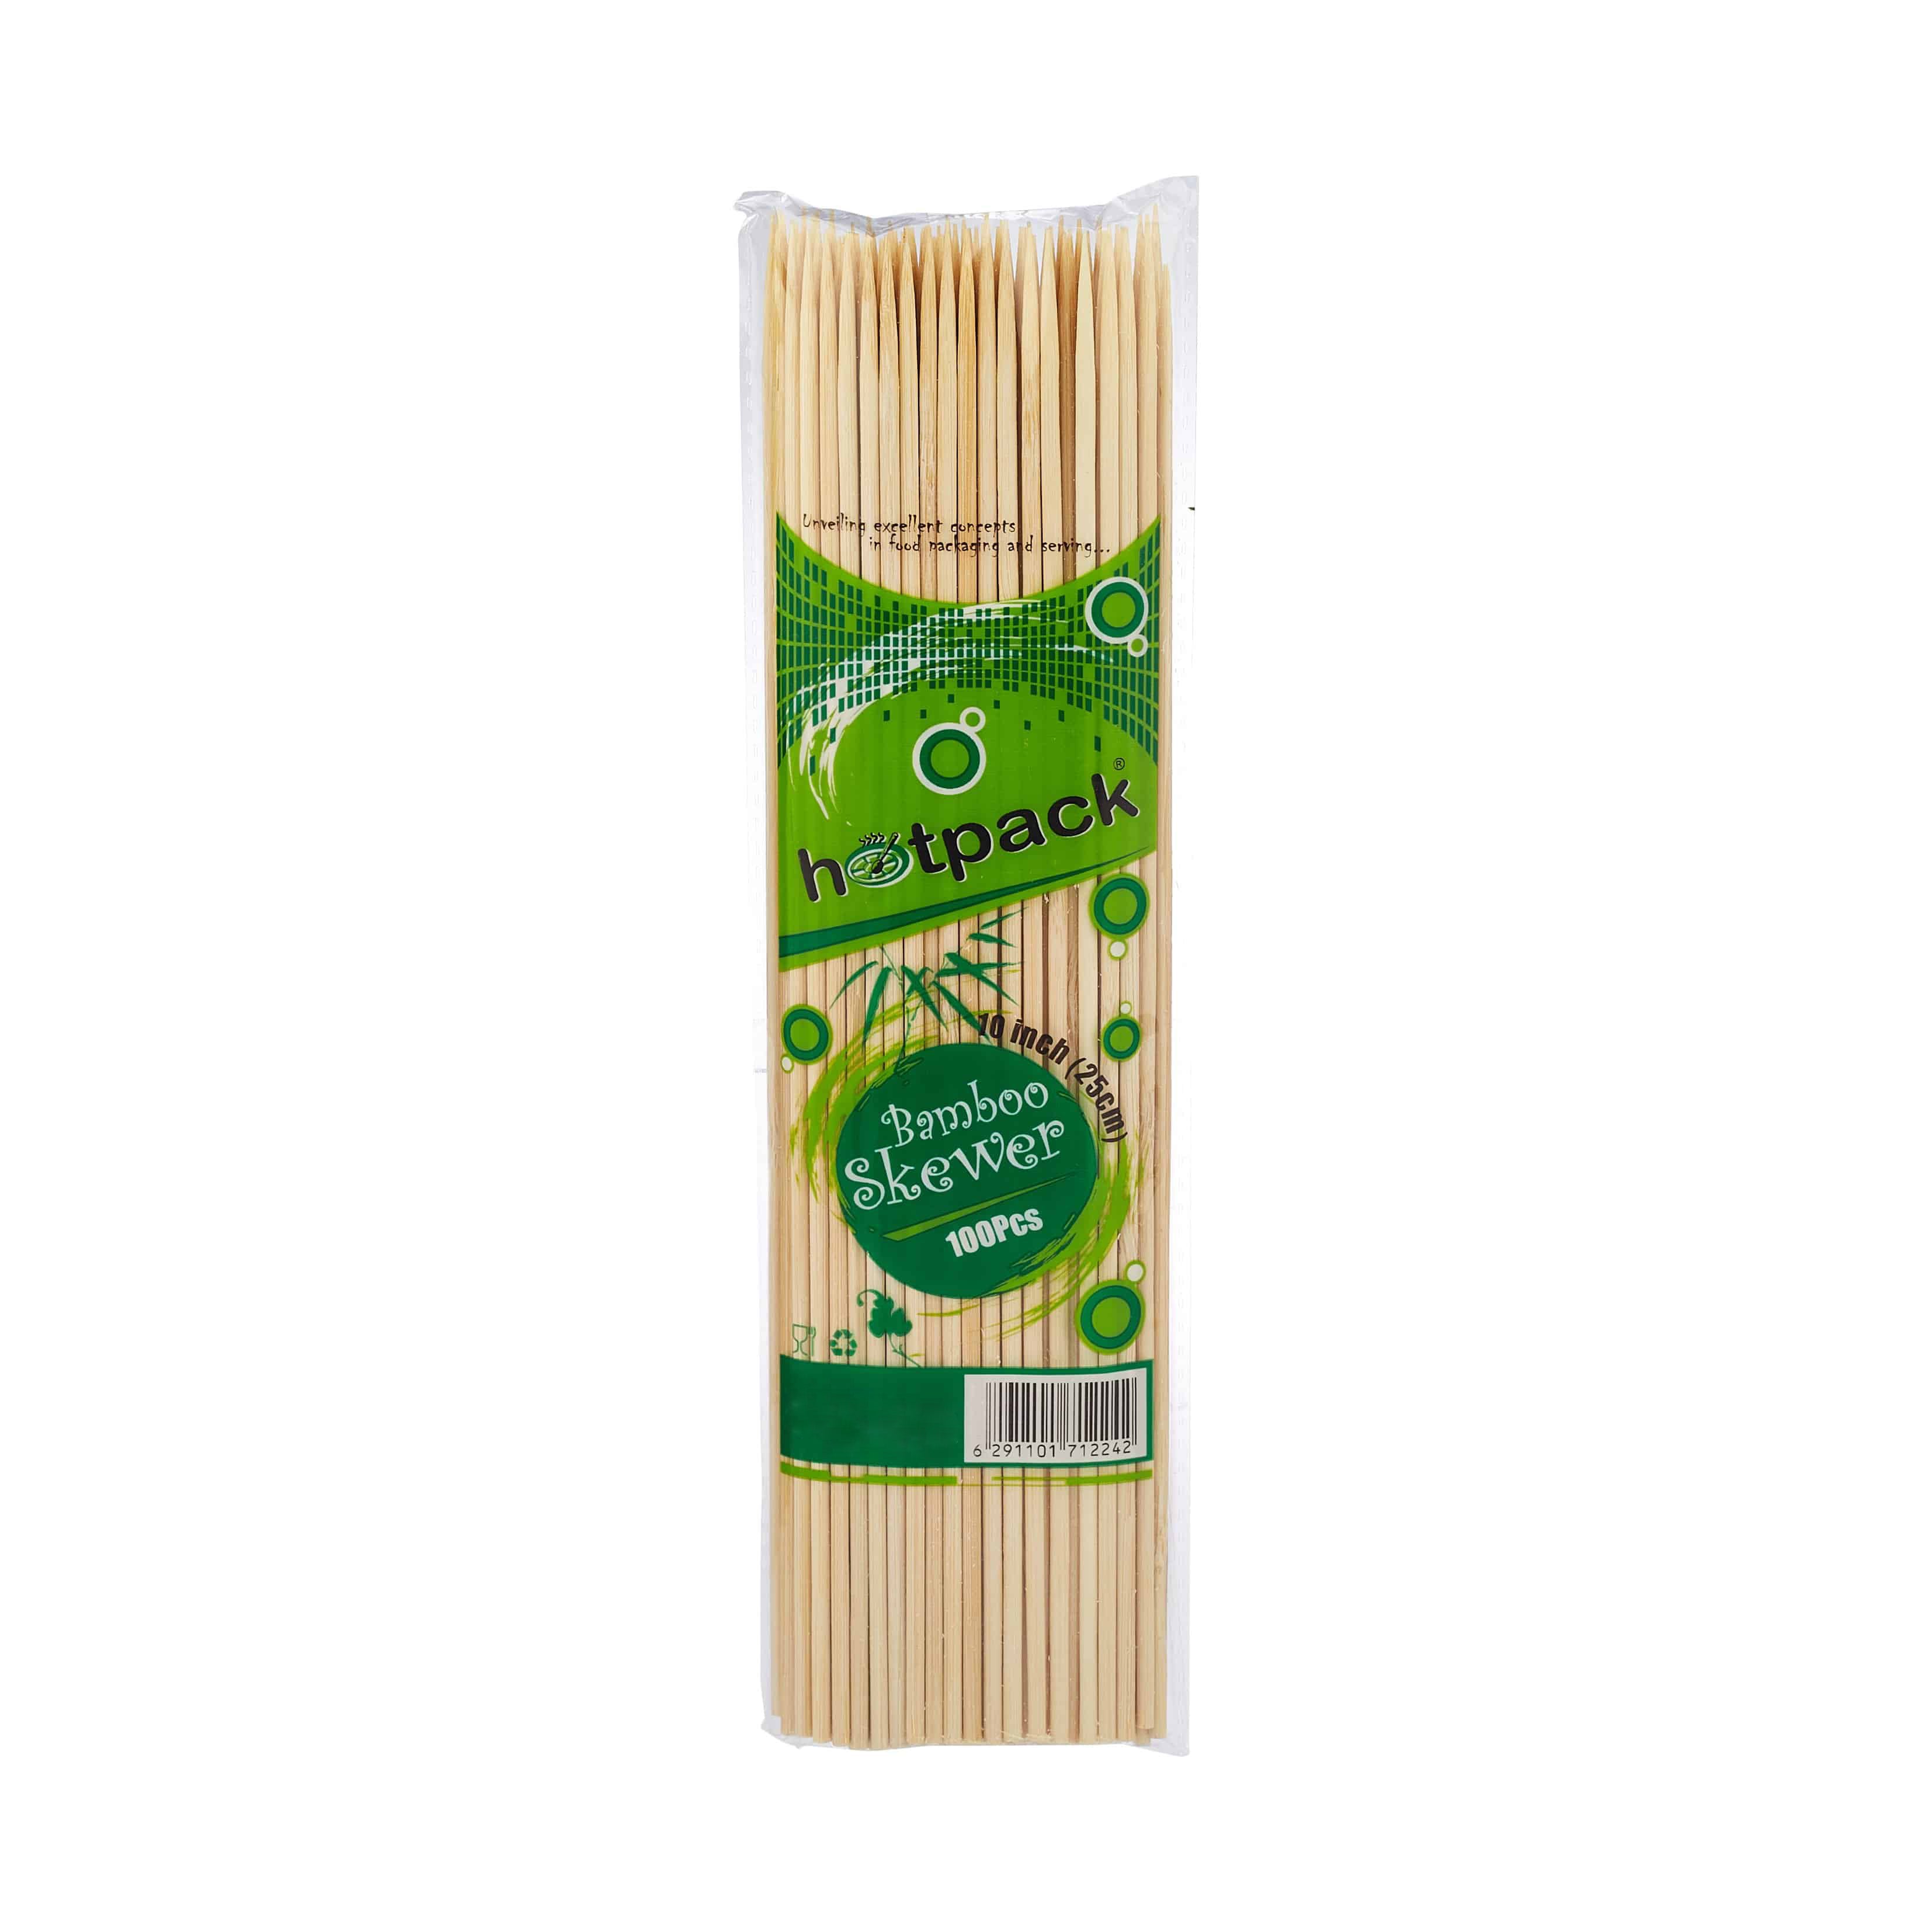 Expert Grill 12 Natural Bamboo Skewers for Grilling, 100 Count